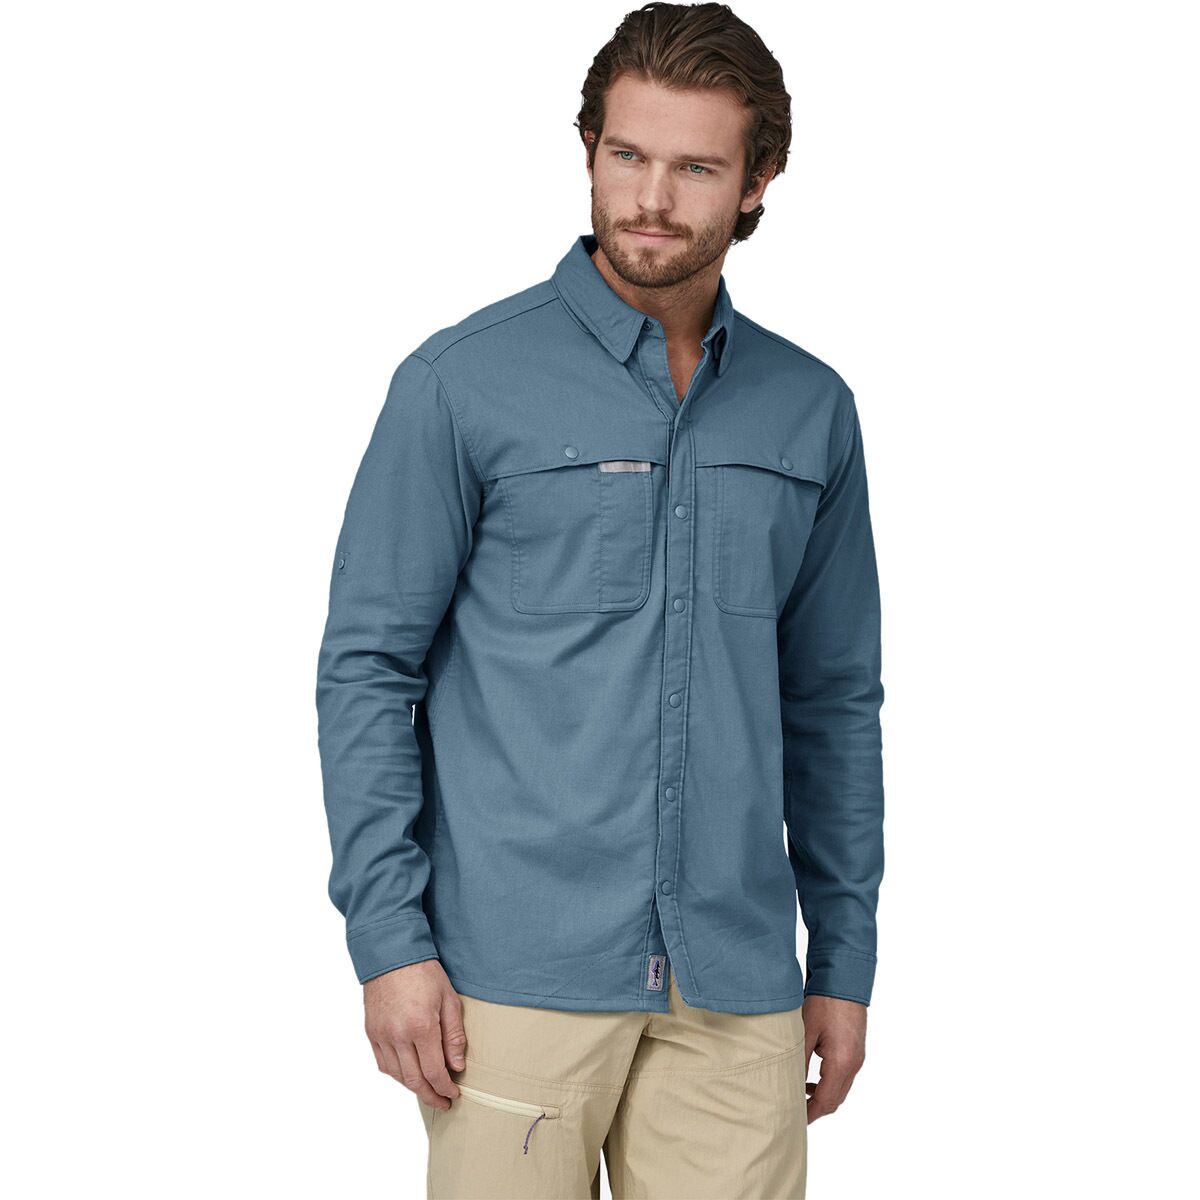 Patagonia Early Rise Stretch Long-Sleeve Shirt - Men's